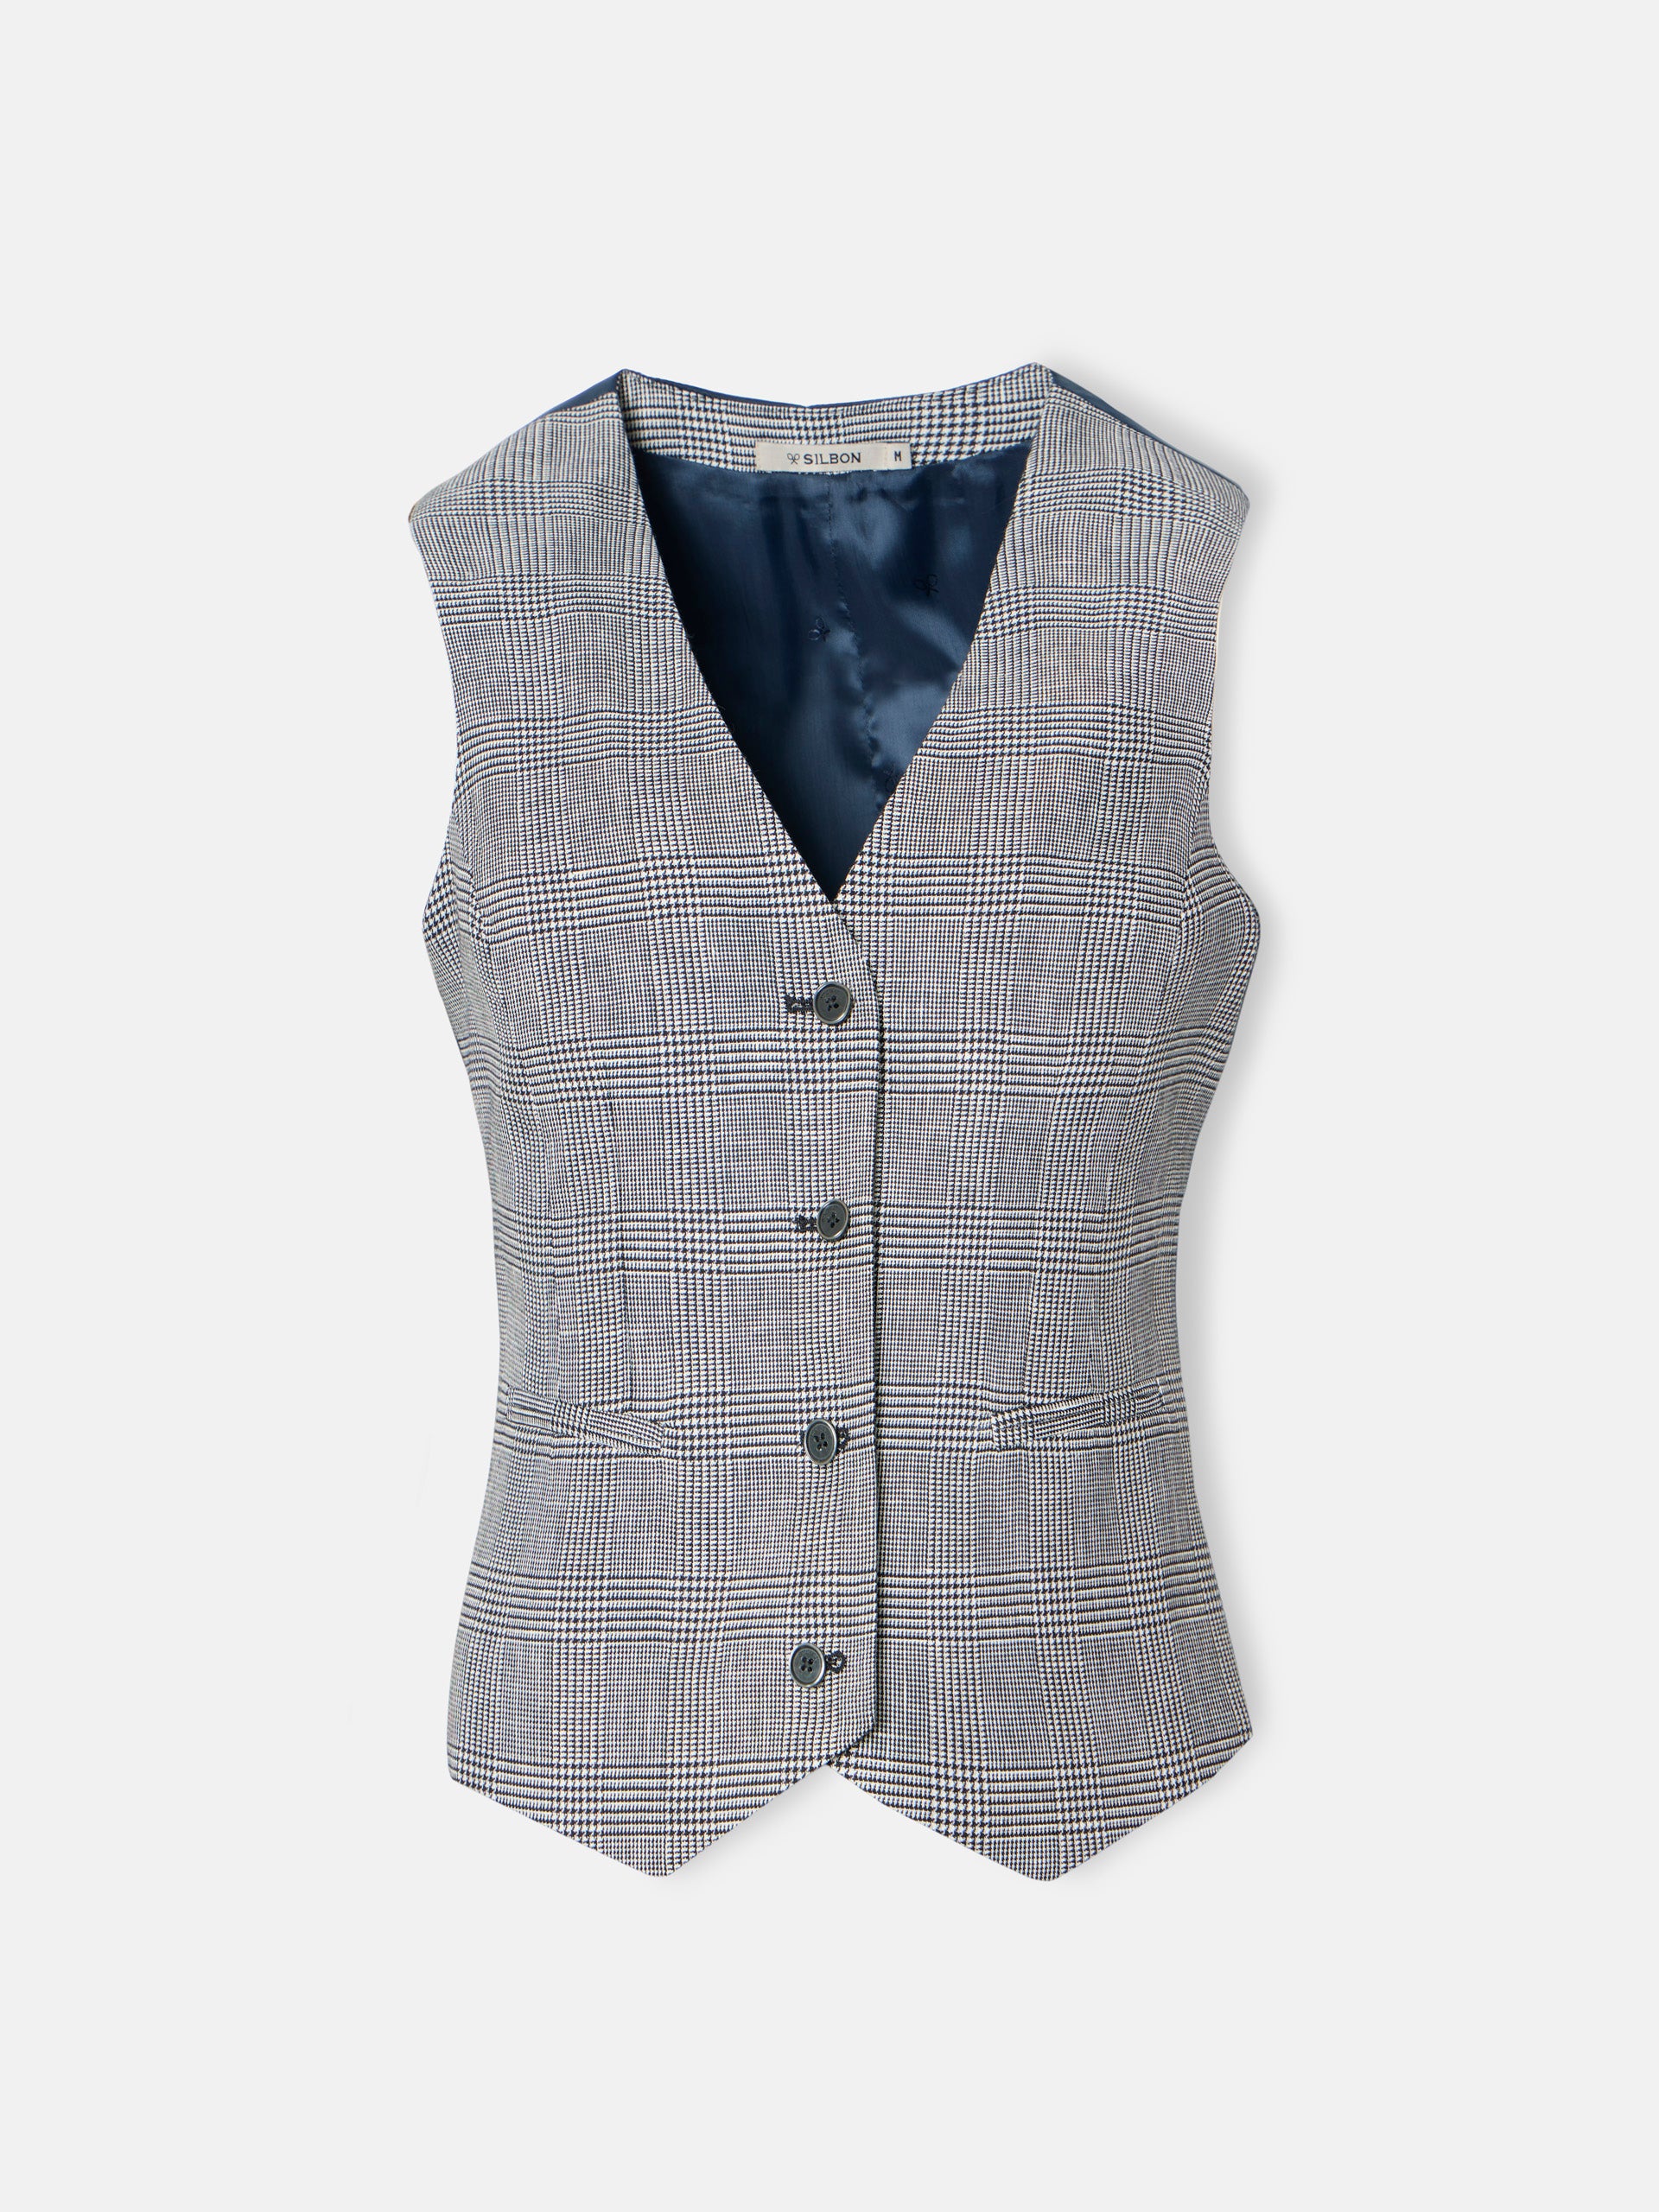 Black and white Prince of Wales vest